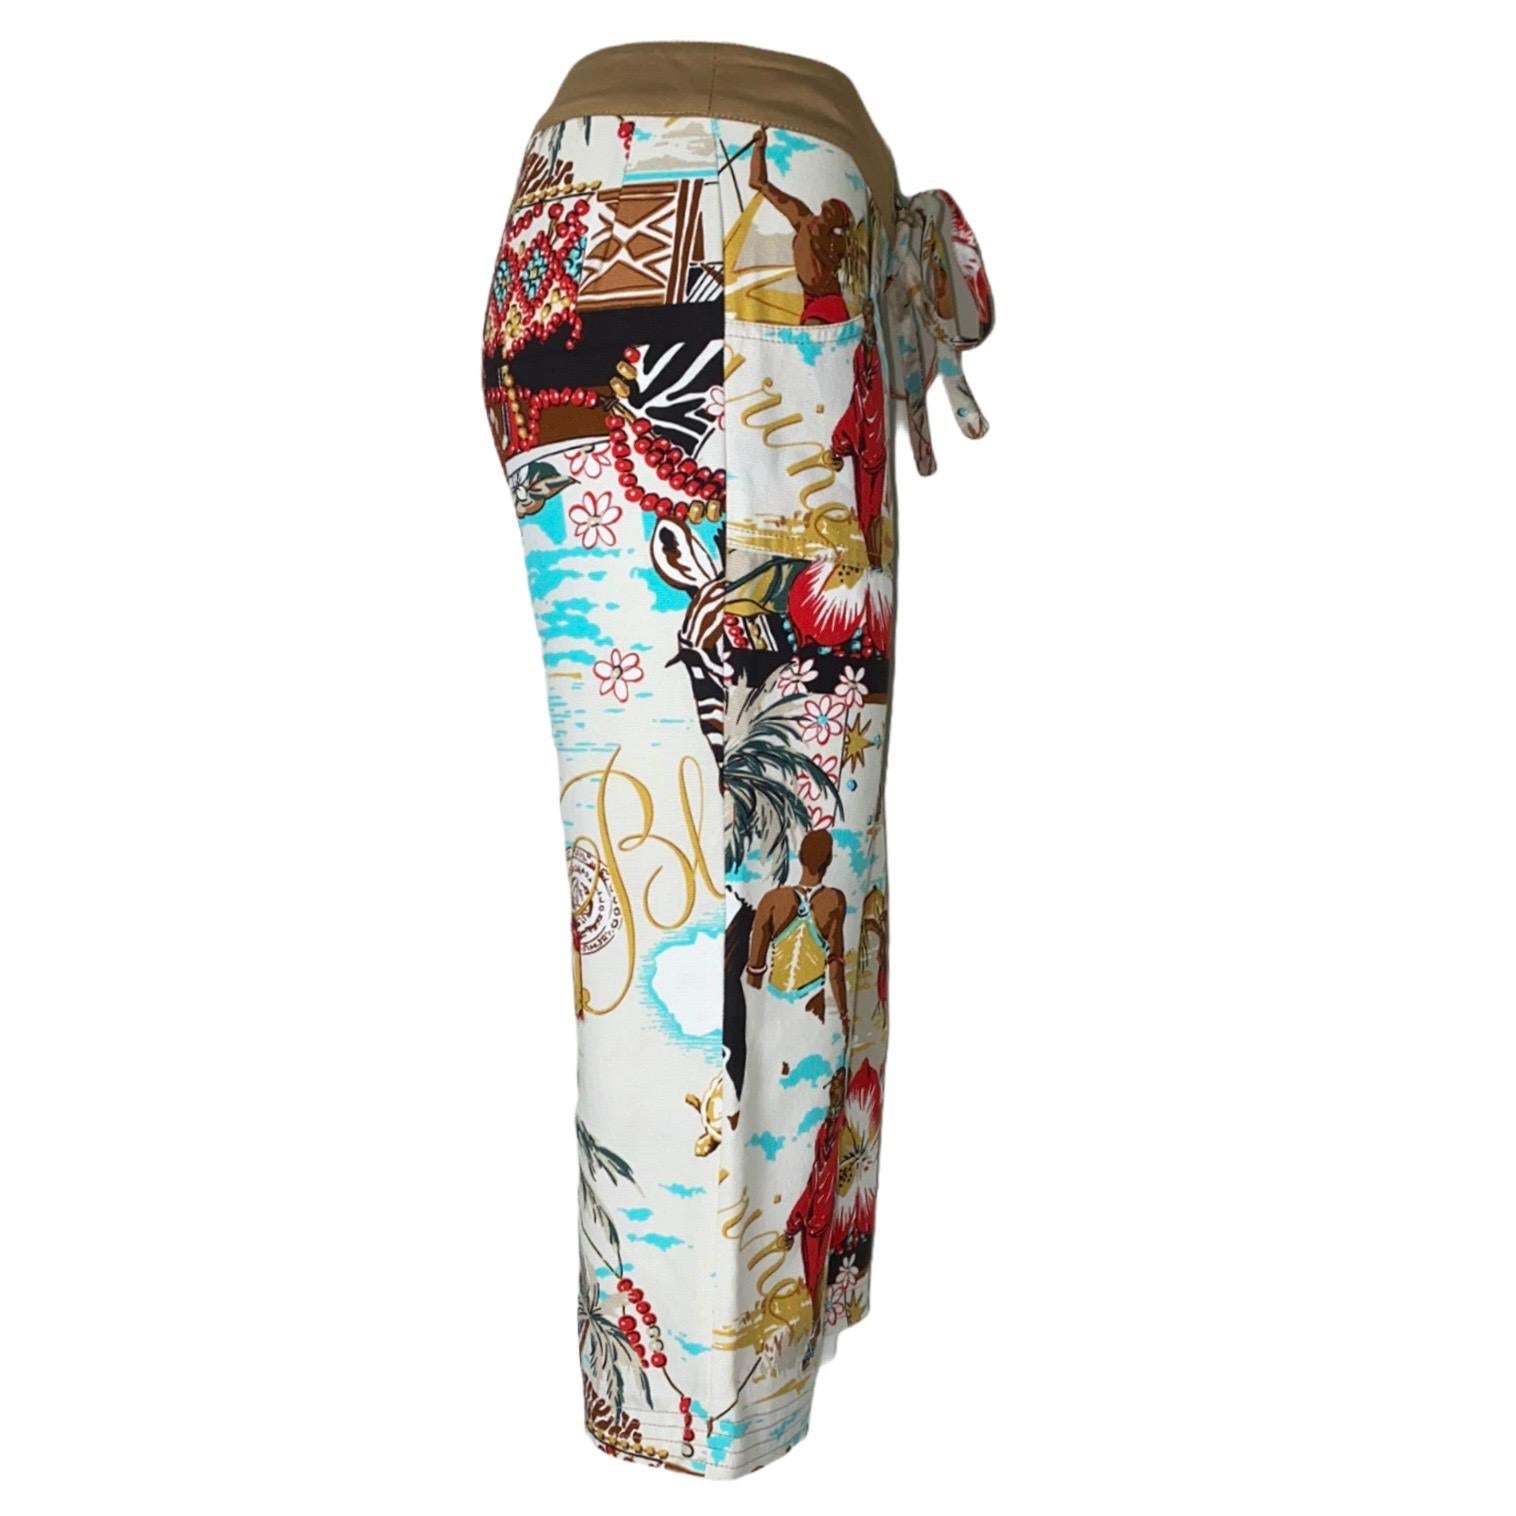 BLUMARINE cropped capri pants
Closes on the side with hidden zipper
Decorative drawstring detail 
Fantastic print with Africa motives
Fabric 1: 100% Cotton Fabric 2: 100% Silk Fabric 3: 97% Cotton, 3% Spandex
    Made in Italy
    Dry Clean